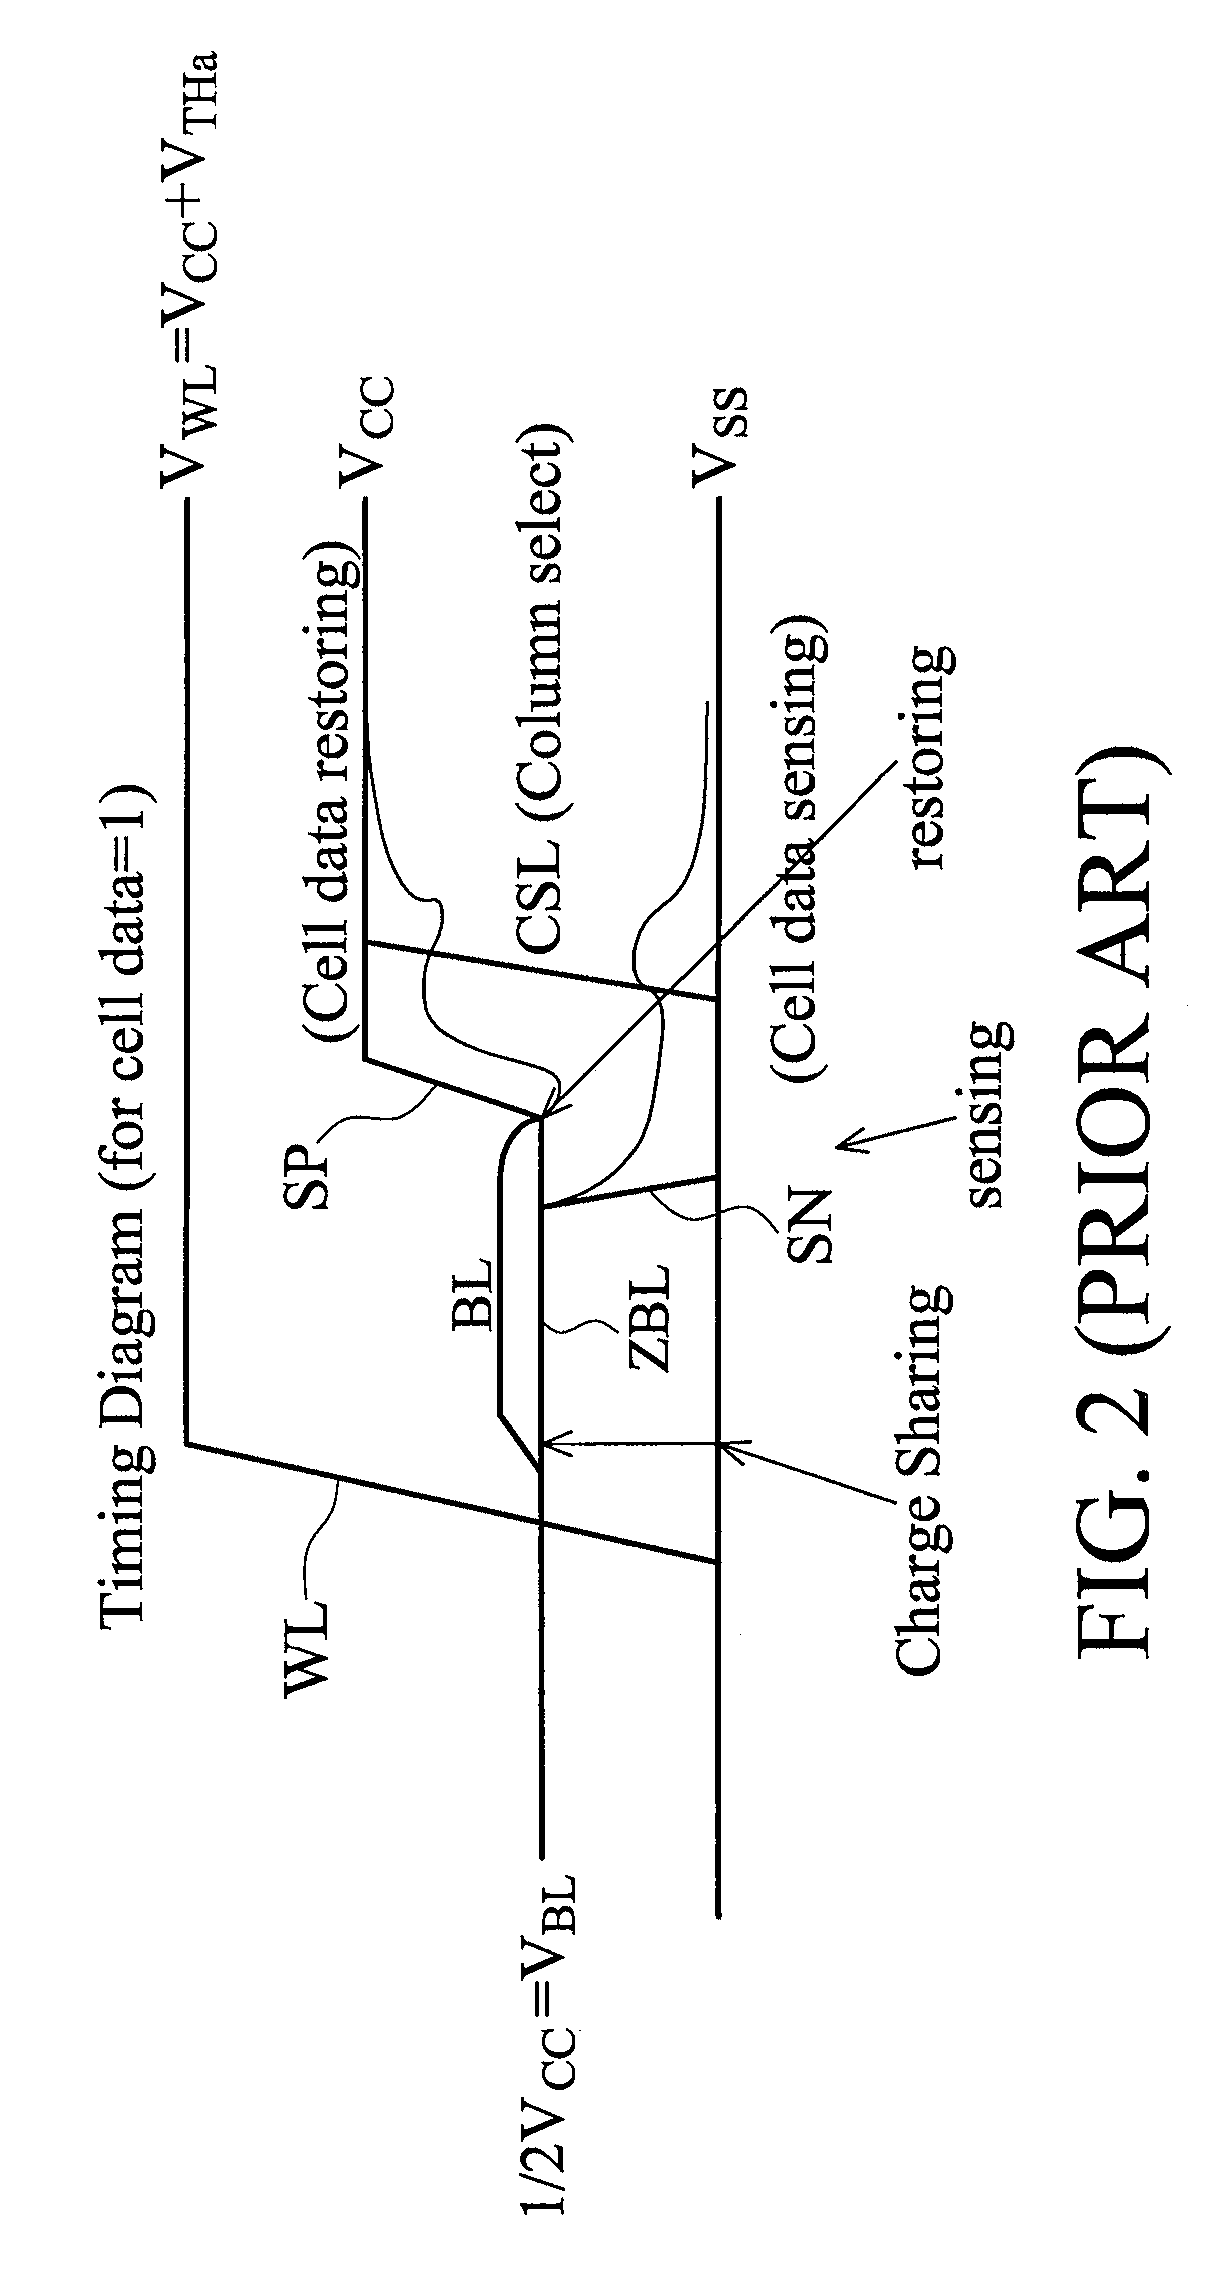 Circuit and Method for a Vdd Level Memory Sense Amplifier